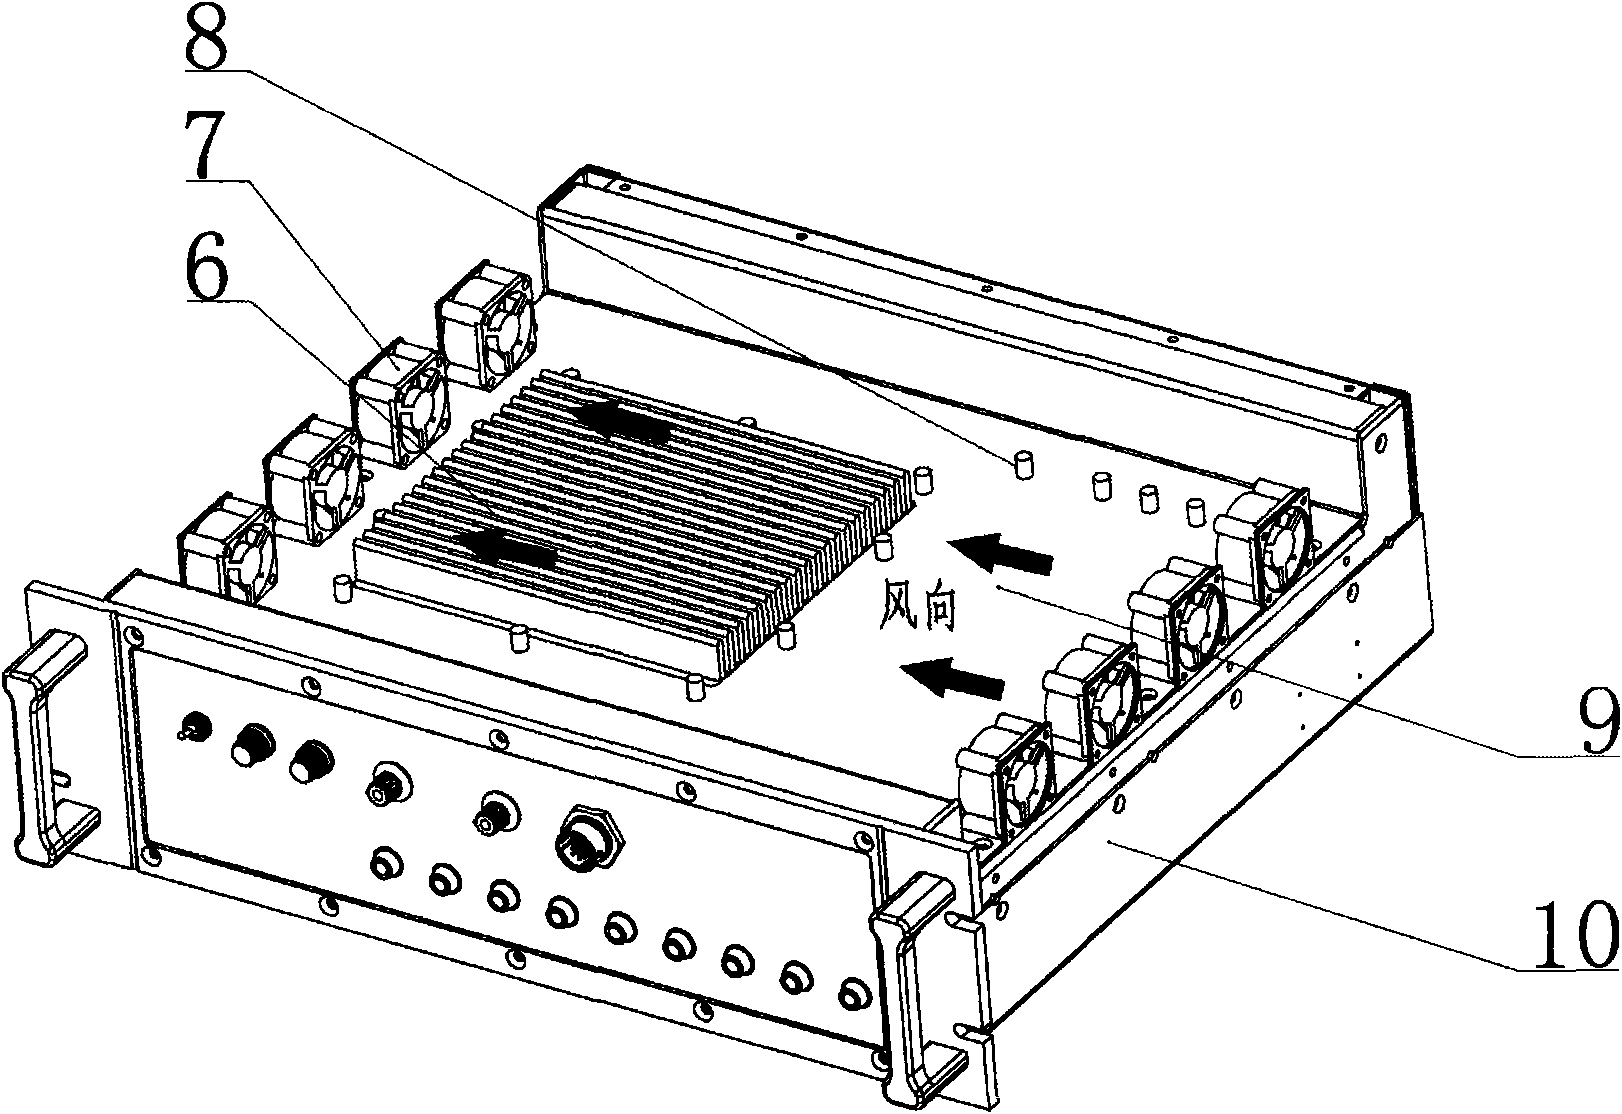 Electronic equipment chassis